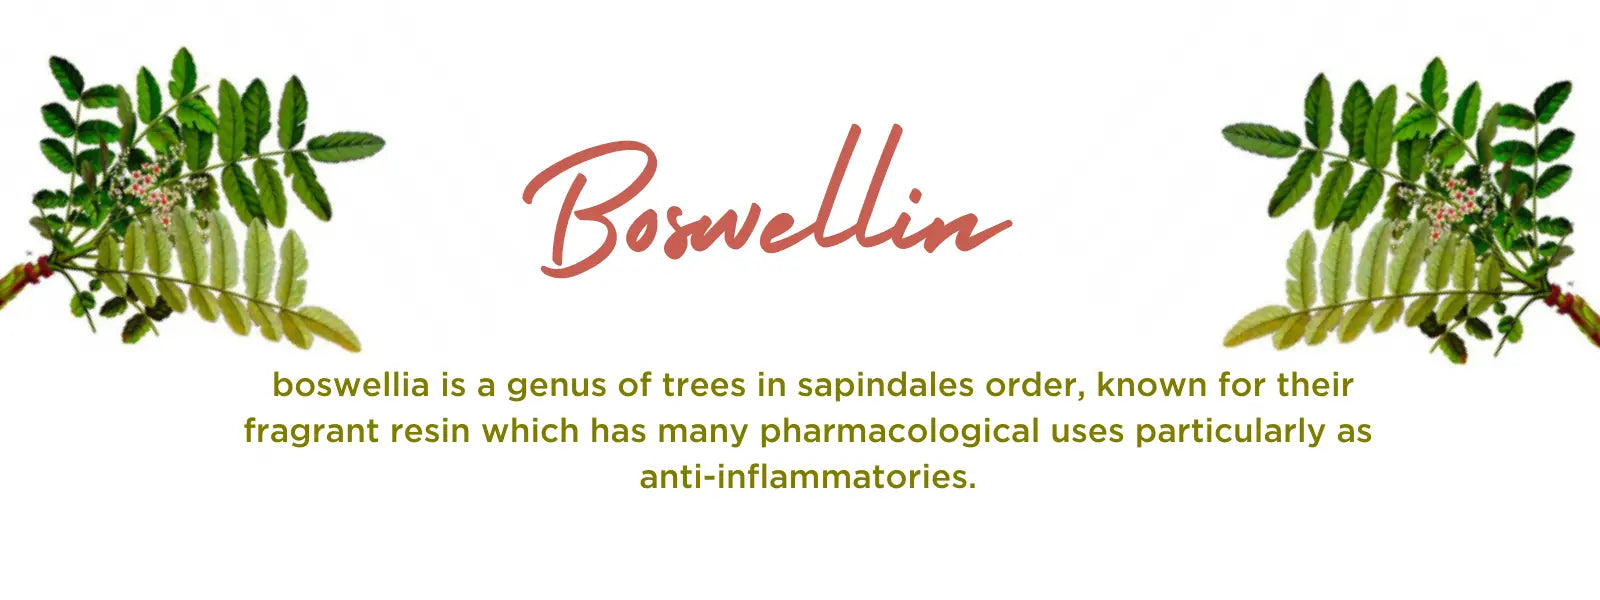 Boswellia - Health Benefits, Uses and Important Facts